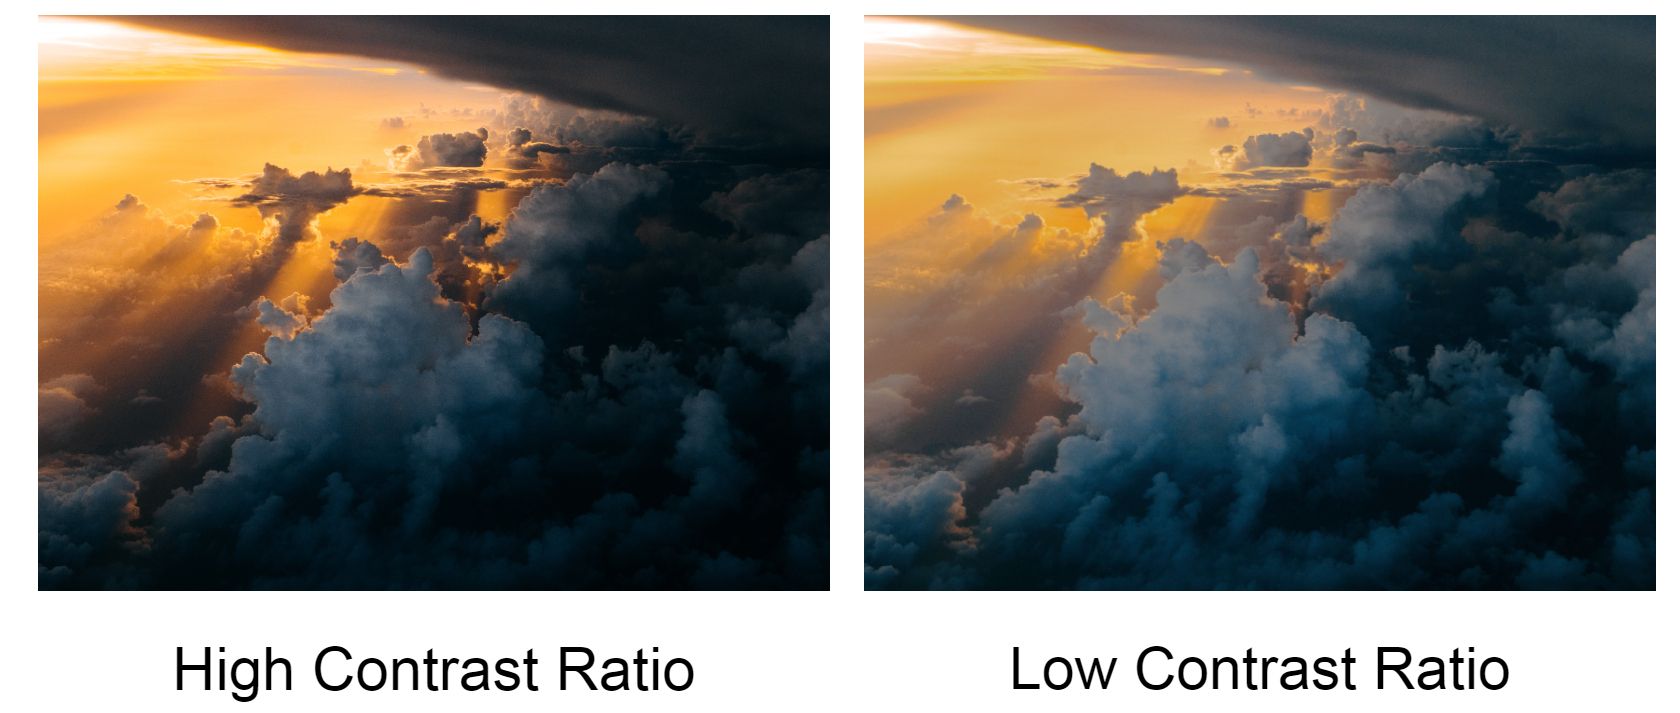 Comparing High and Low Contrast Ratio